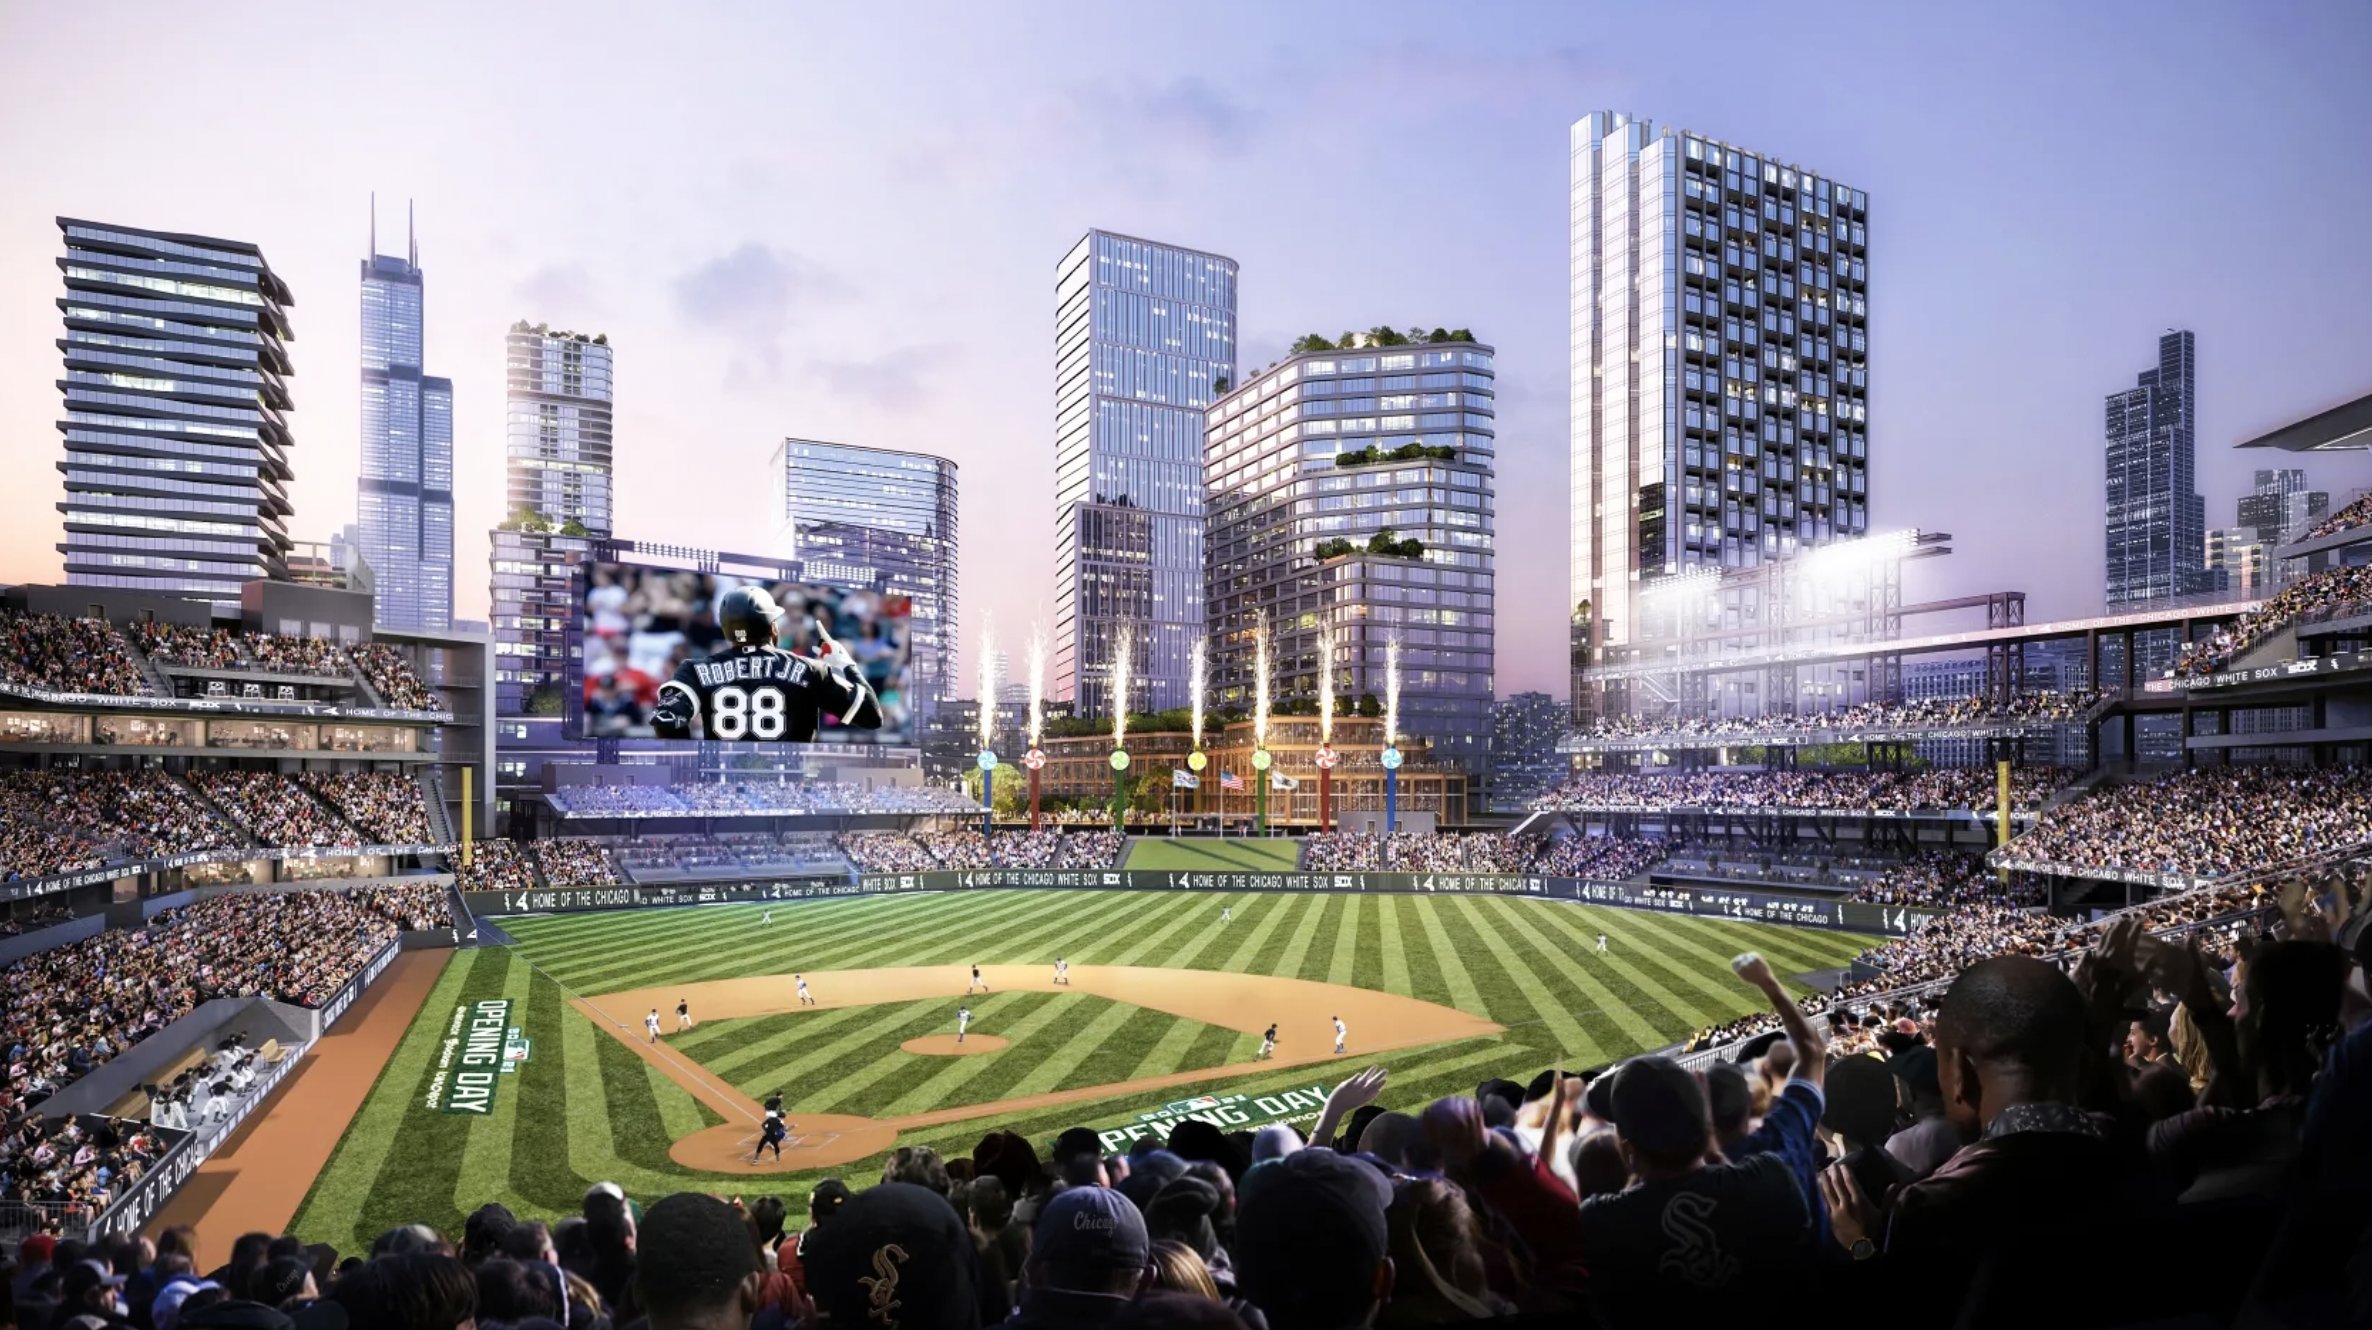 Rendering of a potential Chicago White Sox new ballpark